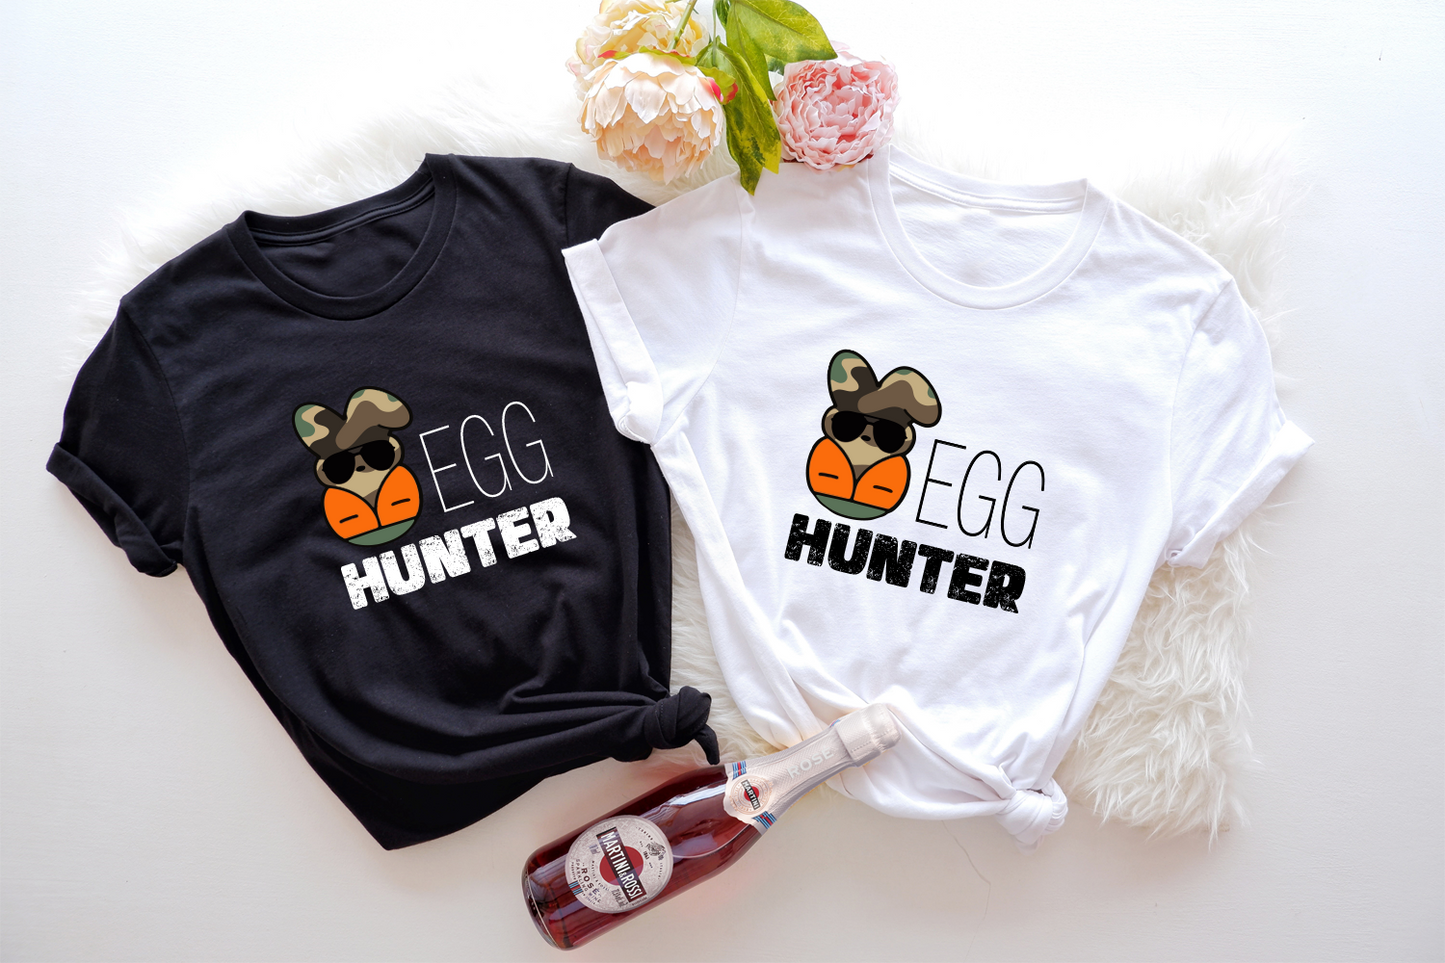 Get your little one ready for the Easter egg hunt Celebrate the joy of Easter in a fun and festive way Dress your child in a comfortable and stylish Easter t-shirt Makes a perfect gift for any toddler or kid who loves Easter